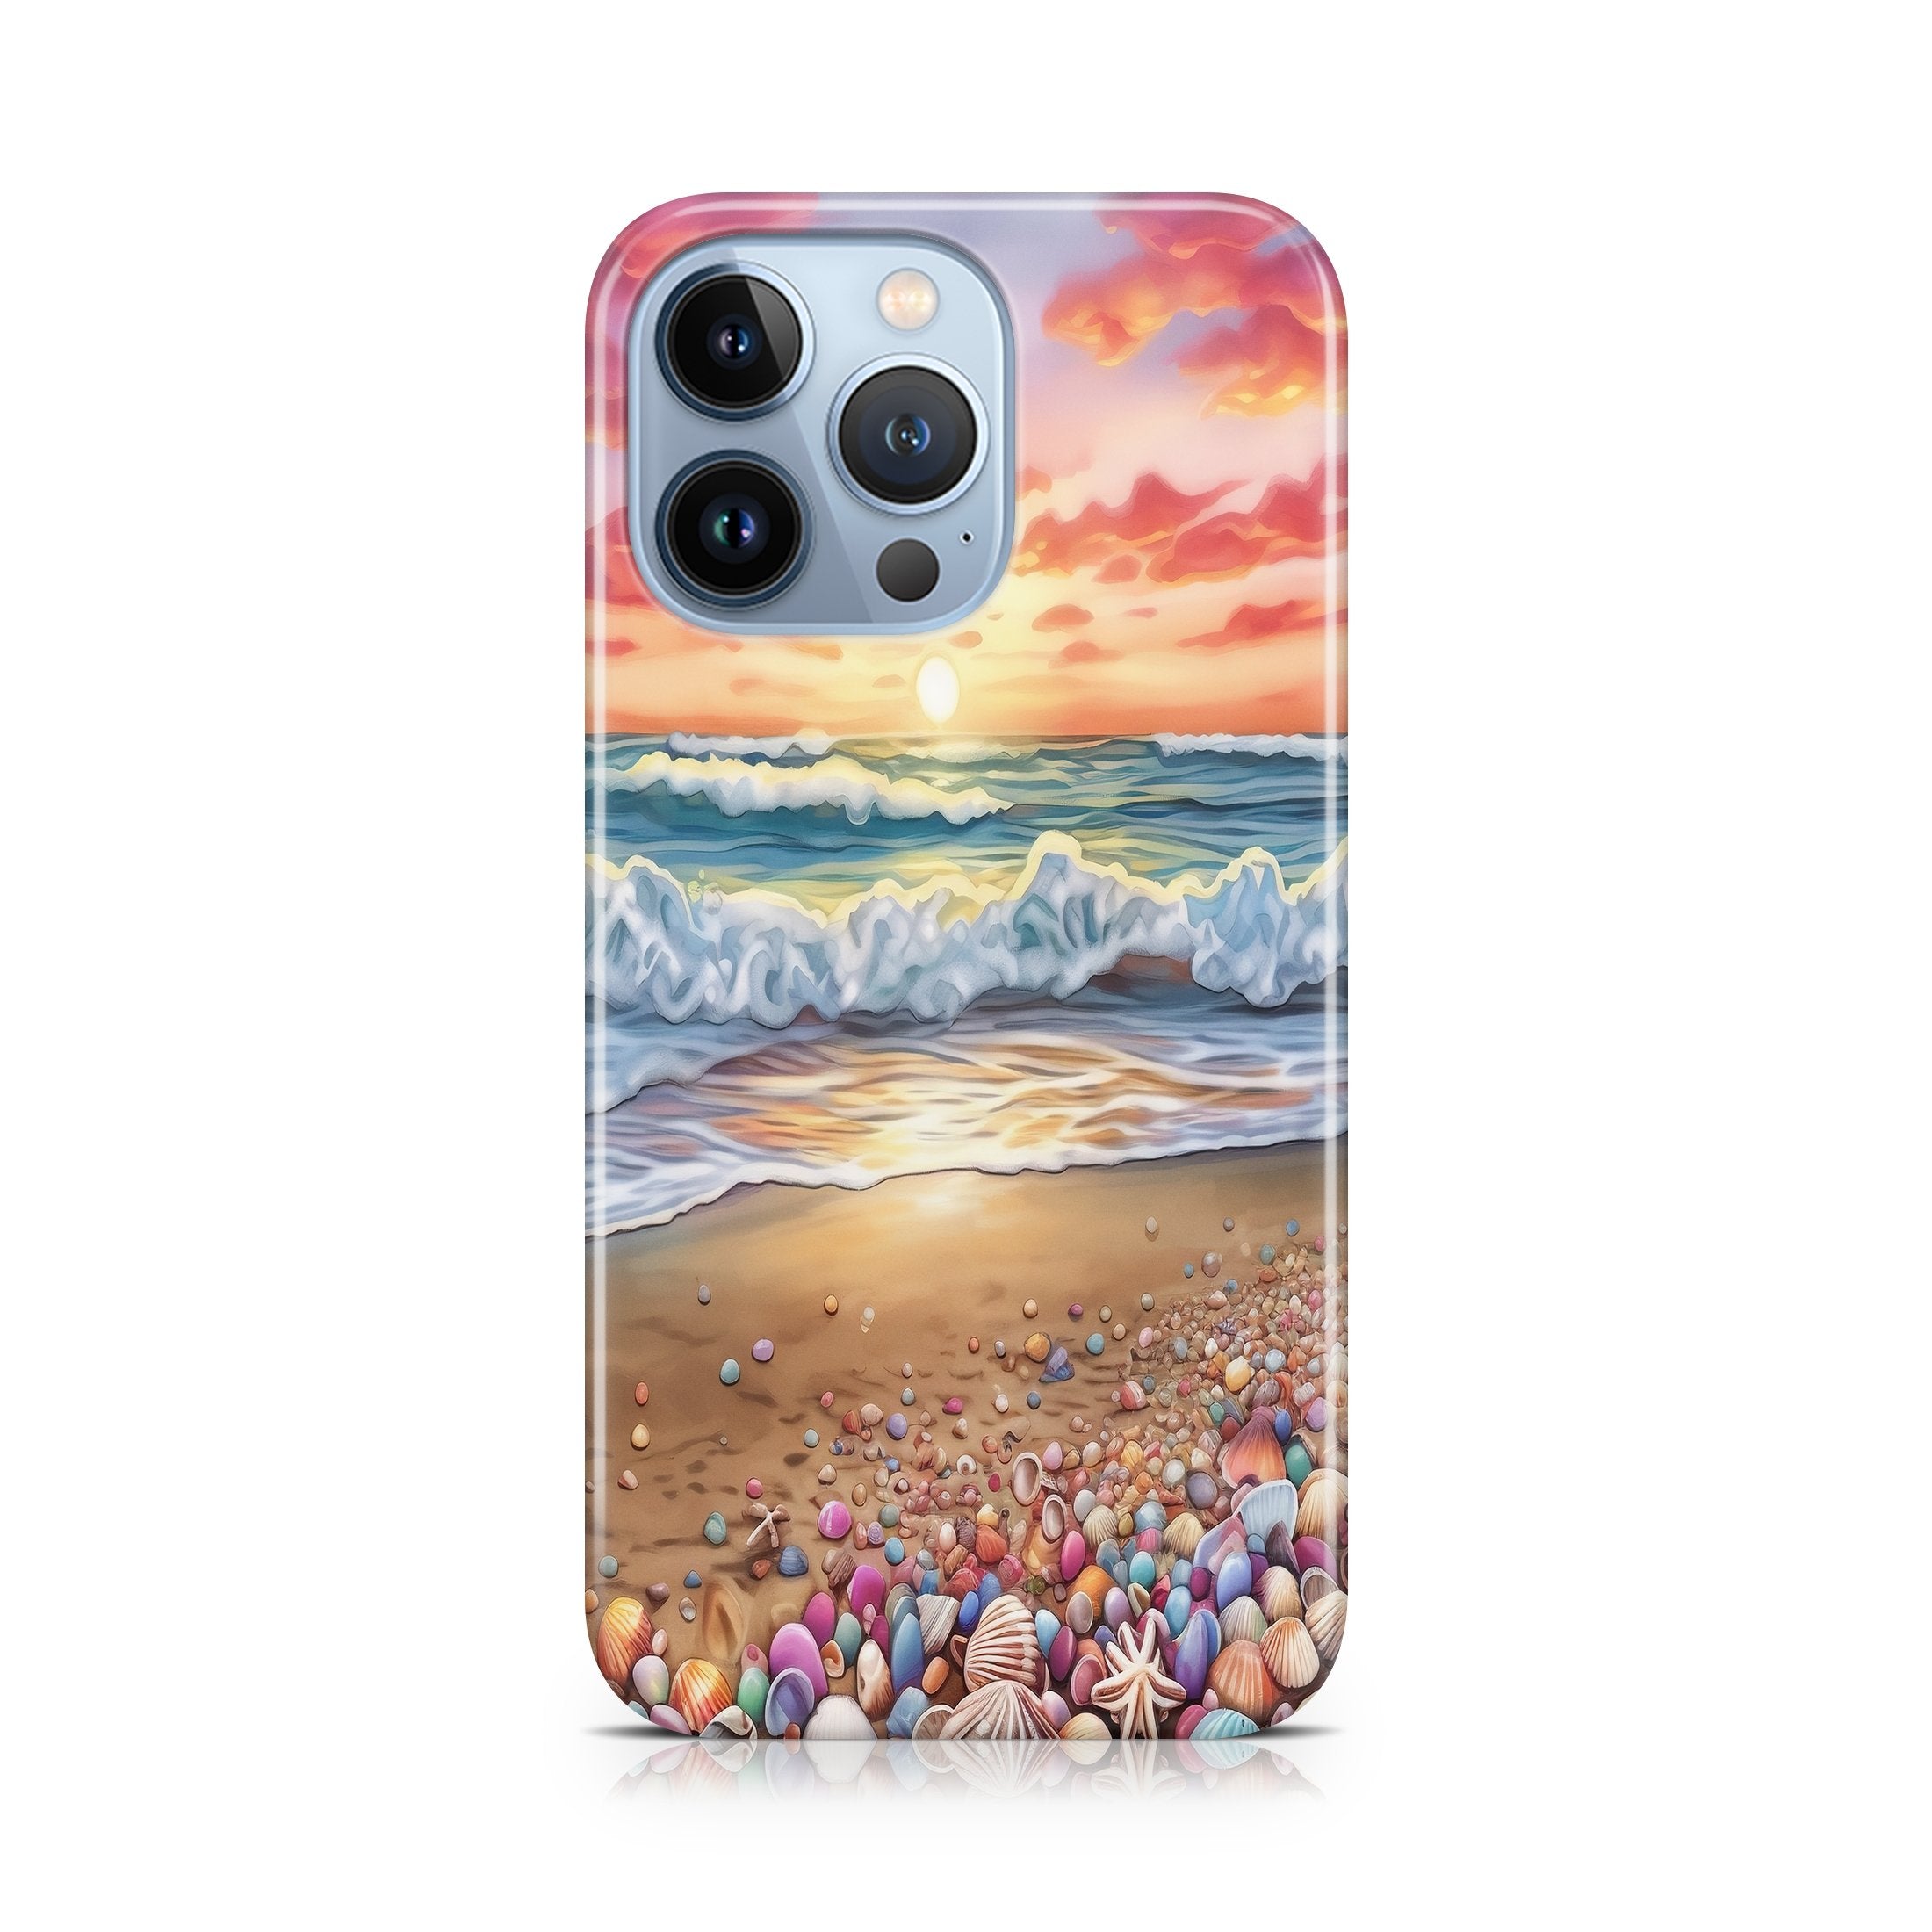 Summertime Shoreline - iPhone phone case designs by CaseSwagger